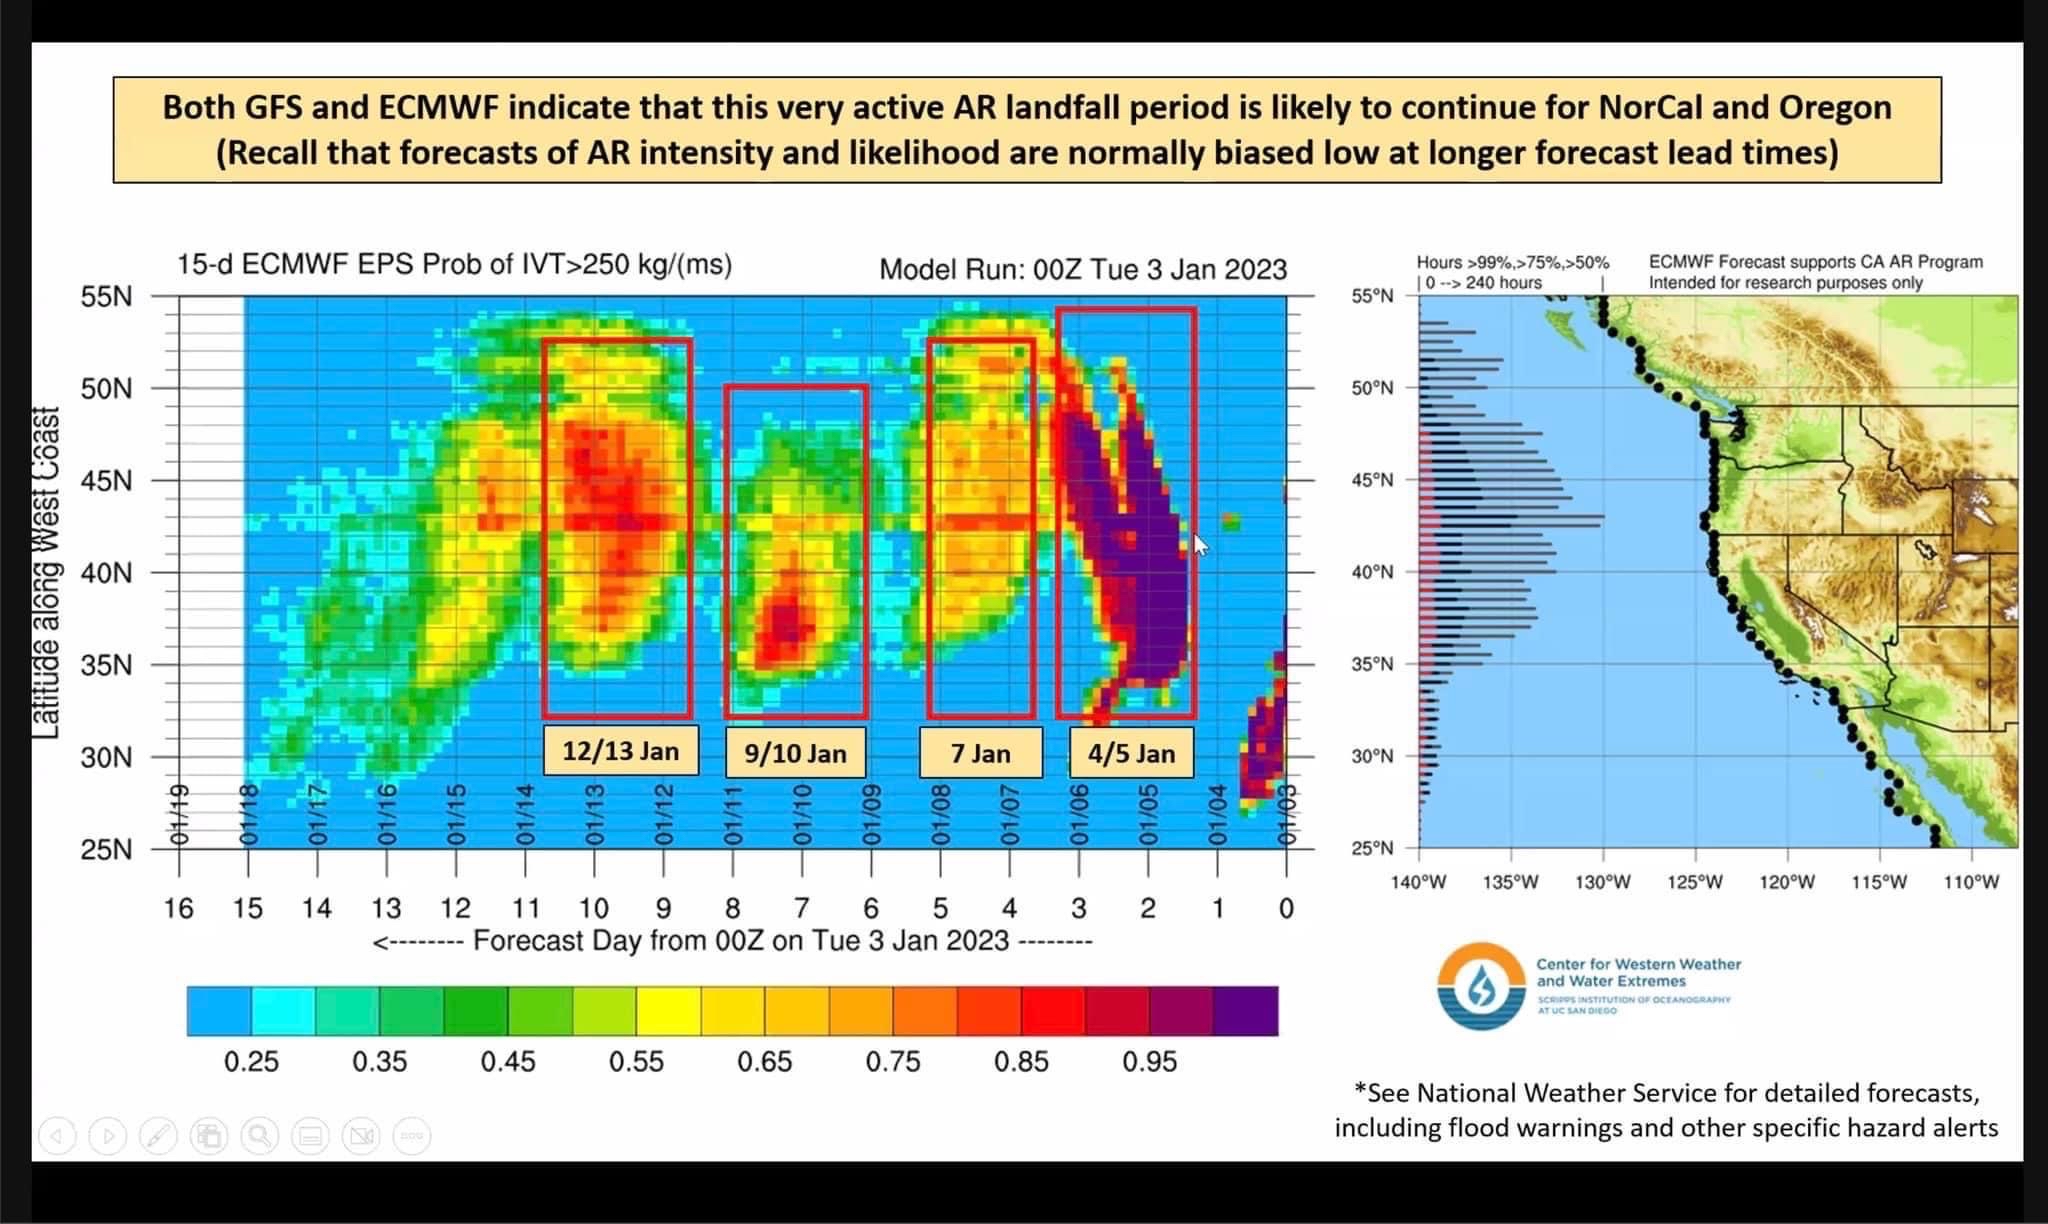 Graphic indicating that a very active Atmospheric River landfall period is likely to continue for NorCal and Oregon. Storm arrivals January 4th & 5th, January 7th, January 9th & 10th and potentially January 12th & 13th 